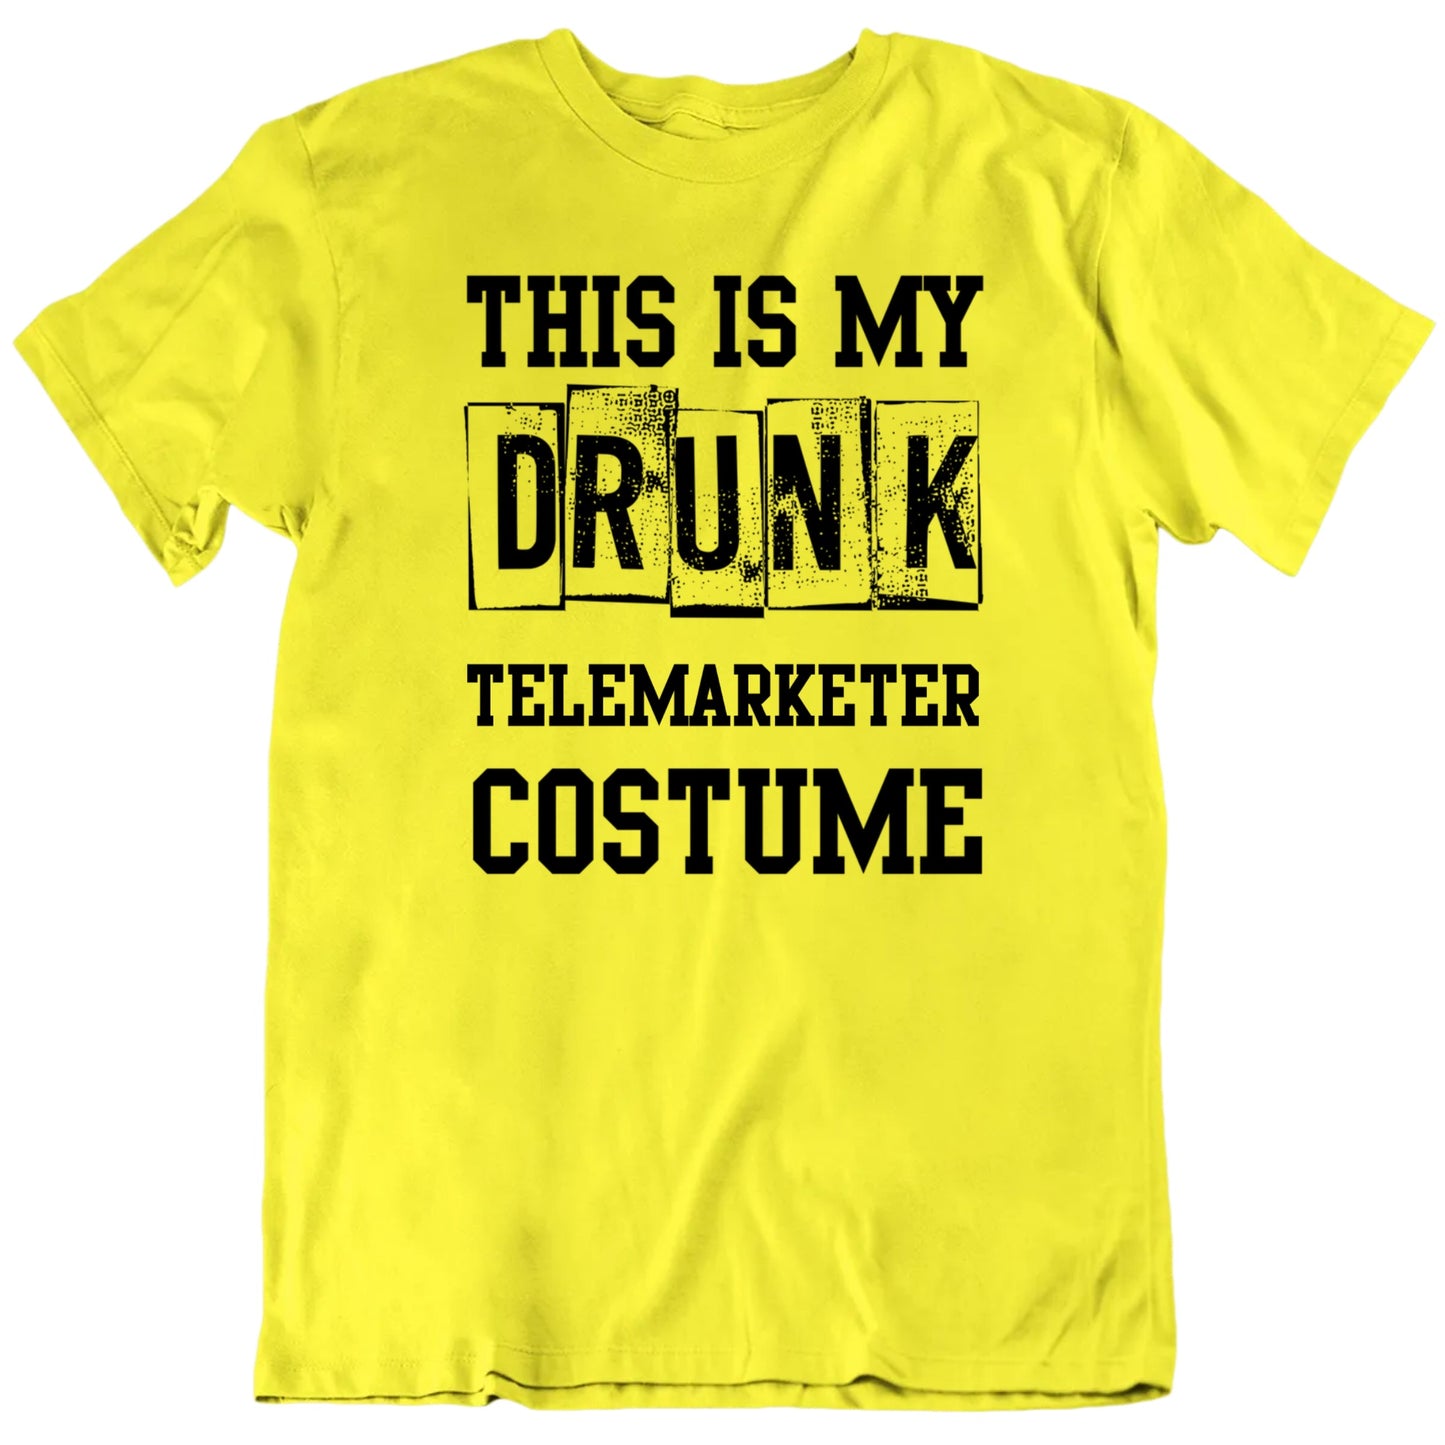 This Is My Drunk Custom Occupation Costume Halloween T shirt